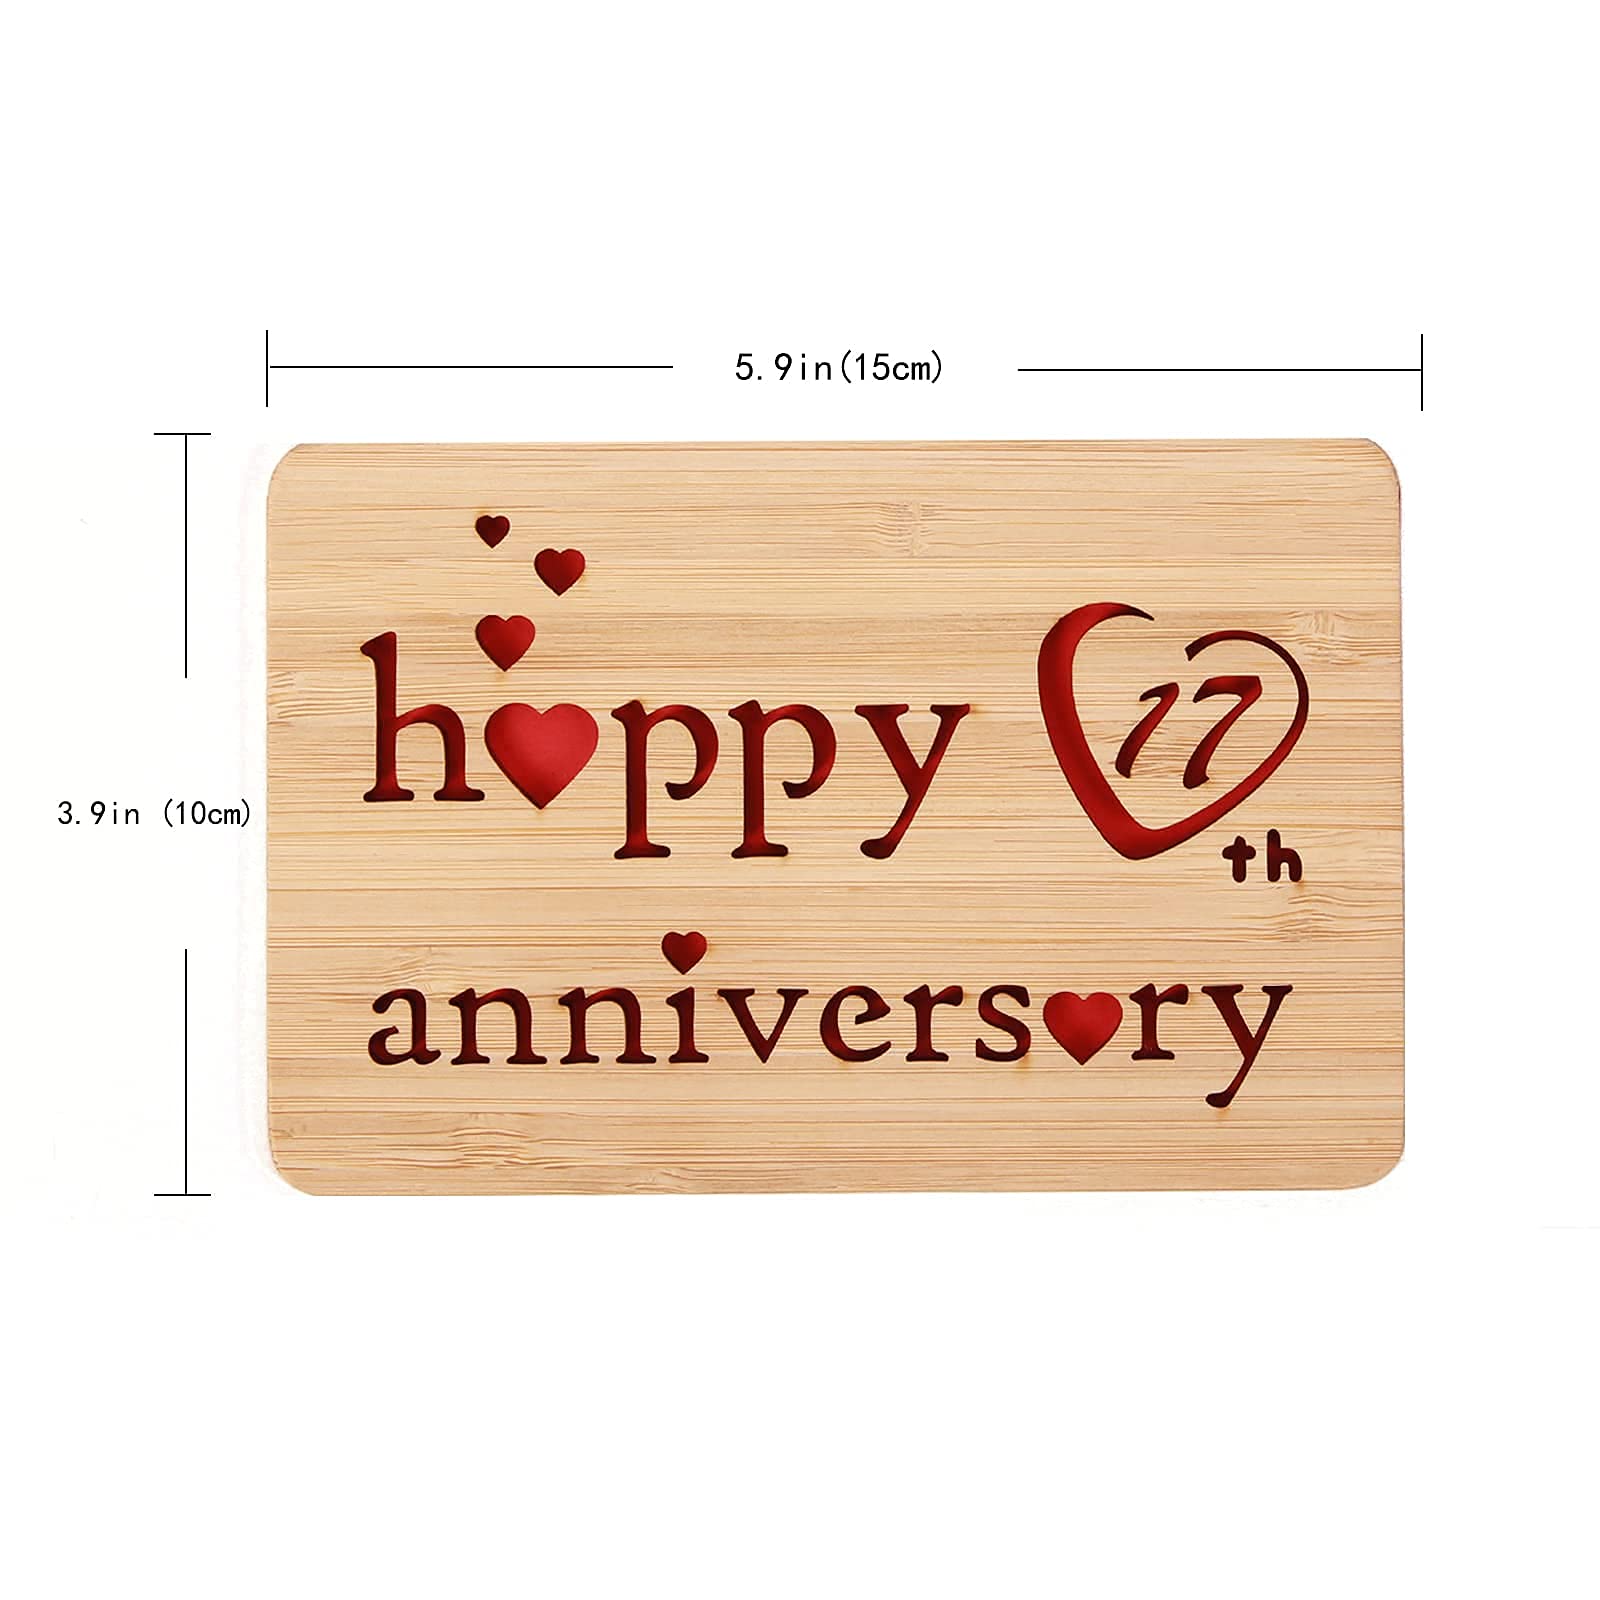 17th Happy Anniversary Cards, Handmade I Love You Greeting Card with Real Bamboo Wood,17 Years Valentines Day Gifts for Him or Her,17th Wedding Anniversary Card for Husband,Wife,Couple